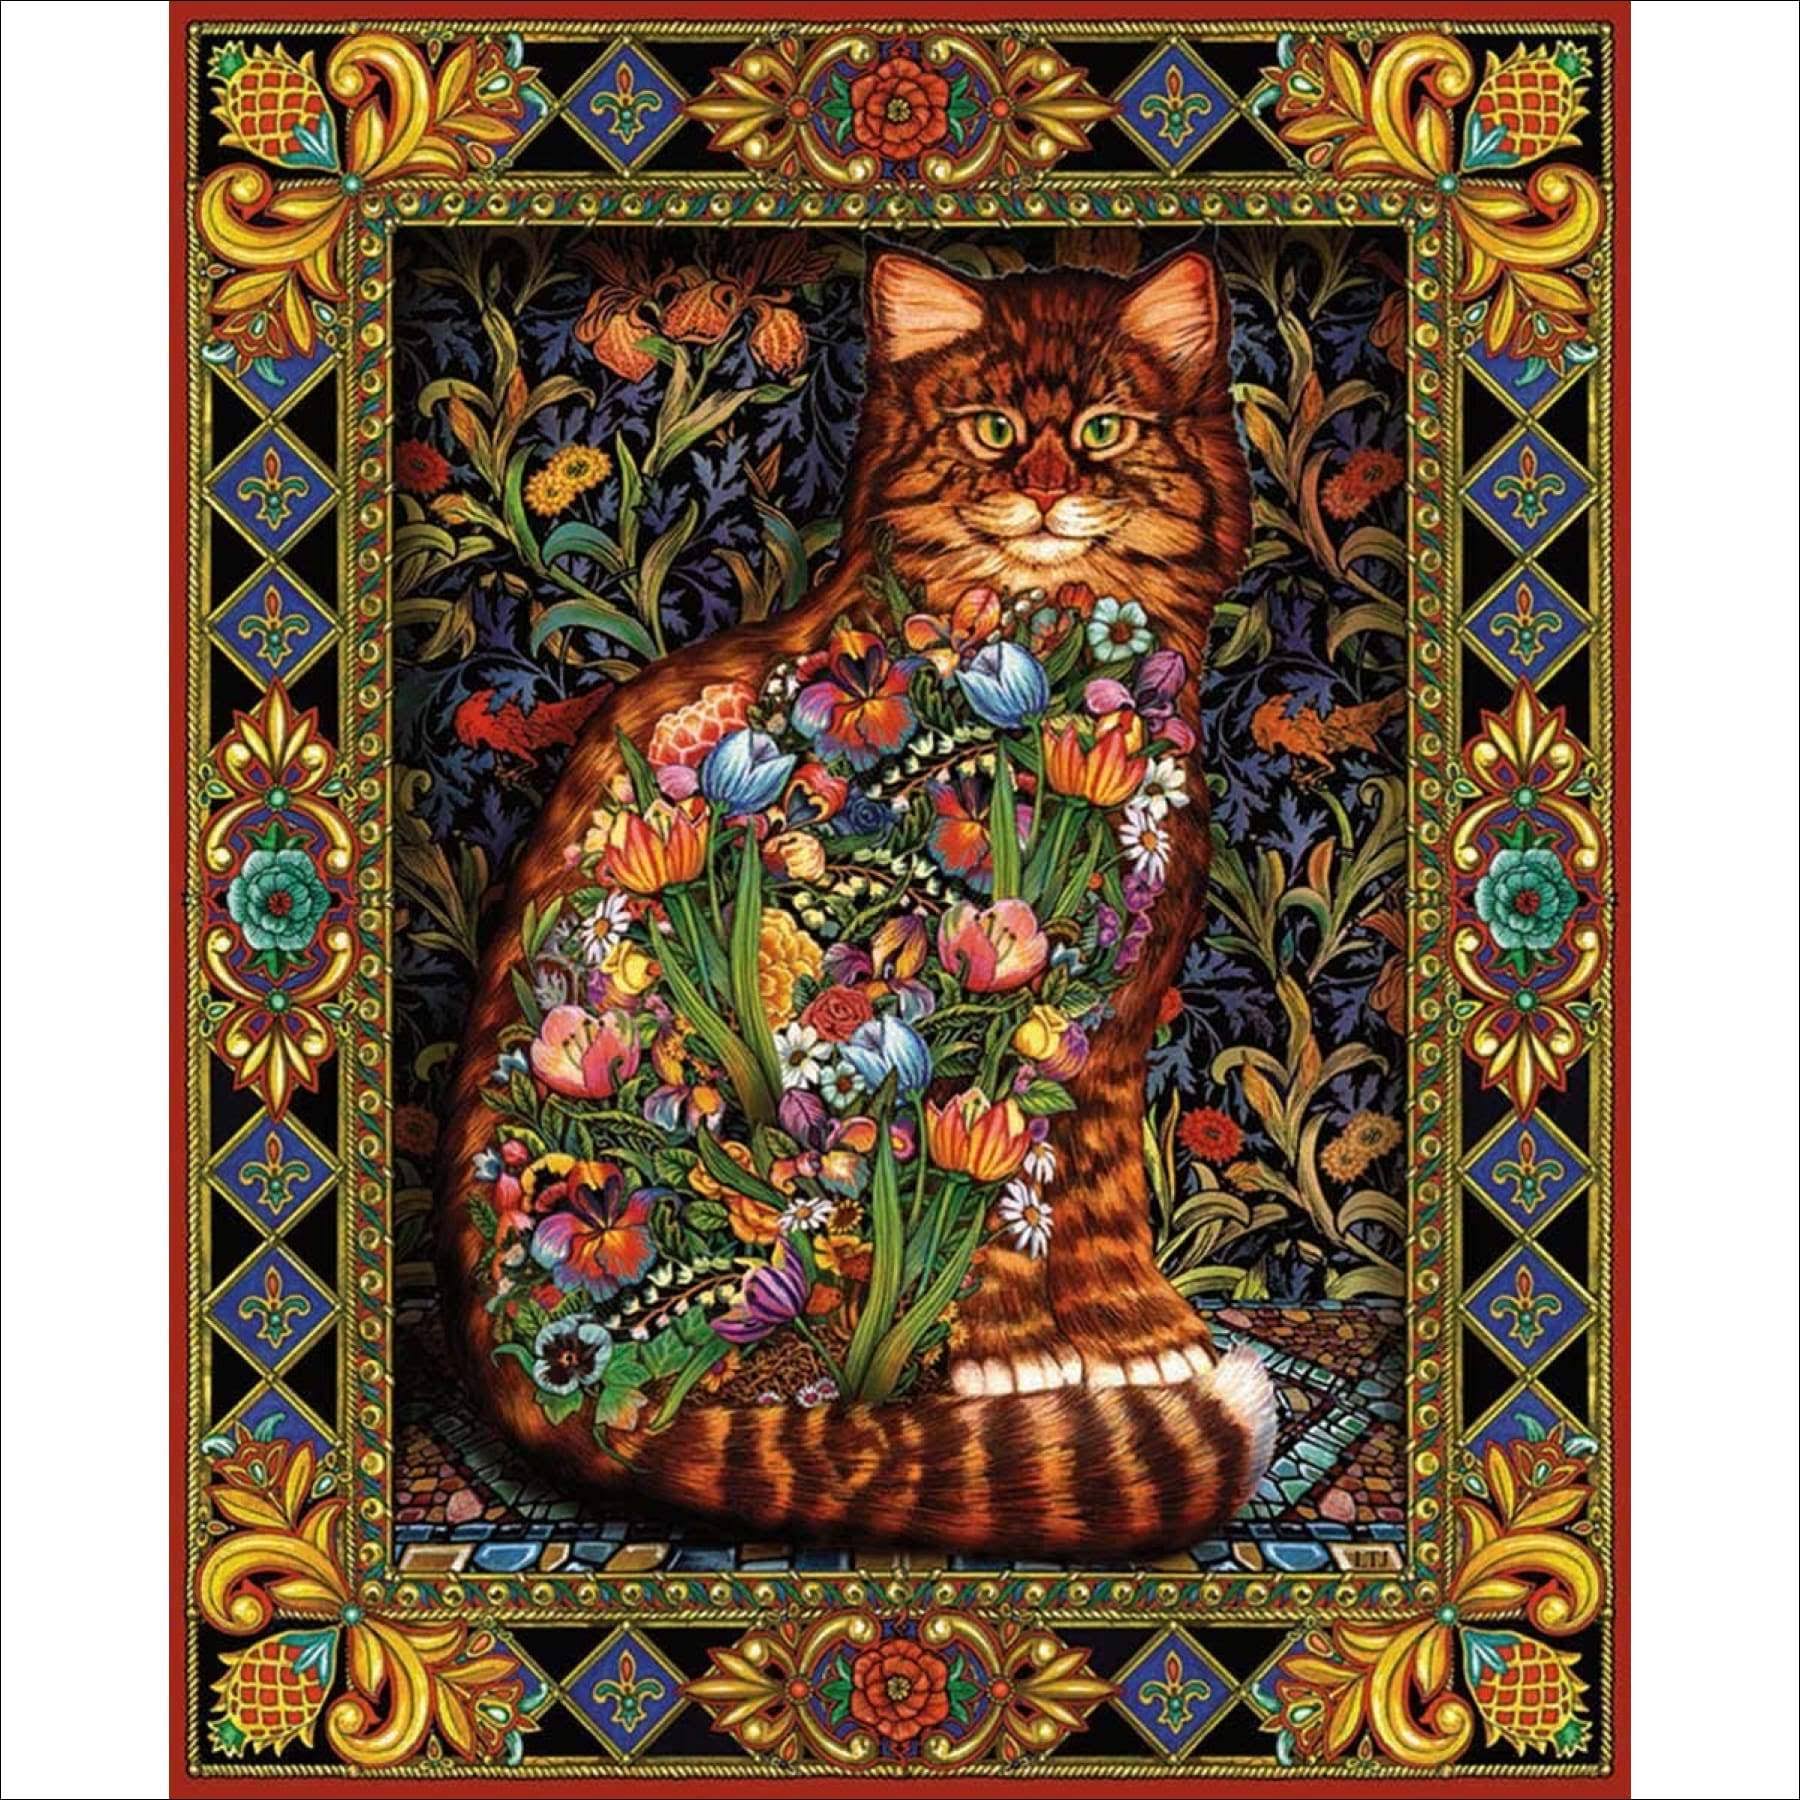 Tapestry Cat White Mountain Jigsaw Puzzles - 1000pcs, 24" X 30"